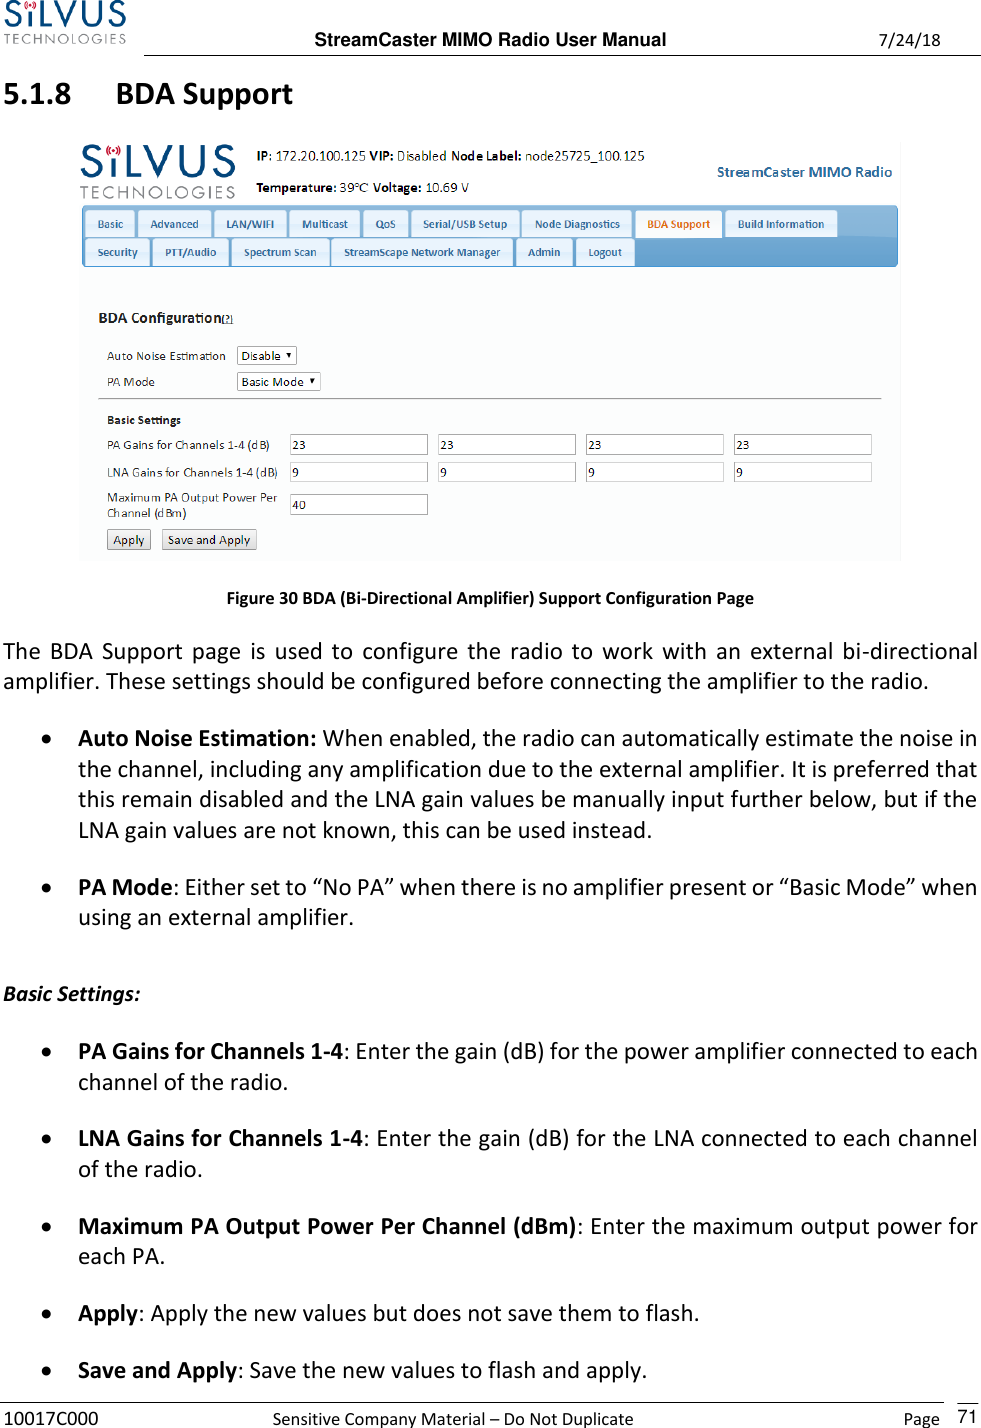  StreamCaster MIMO Radio User Manual  7/24/18 10017C000  Sensitive Company Material – Do Not Duplicate    Page    71 5.1.8 BDA Support  Figure 30 BDA (Bi-Directional Amplifier) Support Configuration Page The BDA Support page is used to configure the radio  to work with an  external bi-directional amplifier. These settings should be configured before connecting the amplifier to the radio. • Auto Noise Estimation: When enabled, the radio can automatically estimate the noise in the channel, including any amplification due to the external amplifier. It is preferred that this remain disabled and the LNA gain values be manually input further below, but if the LNA gain values are not known, this can be used instead. • PA Mode: Either set to “No PA” when there is no amplifier present or “Basic Mode” when using an external amplifier.  Basic Settings: • PA Gains for Channels 1-4: Enter the gain (dB) for the power amplifier connected to each channel of the radio. • LNA Gains for Channels 1-4: Enter the gain (dB) for the LNA connected to each channel of the radio. • Maximum PA Output Power Per Channel (dBm): Enter the maximum output power for each PA. • Apply: Apply the new values but does not save them to flash. • Save and Apply: Save the new values to flash and apply. 